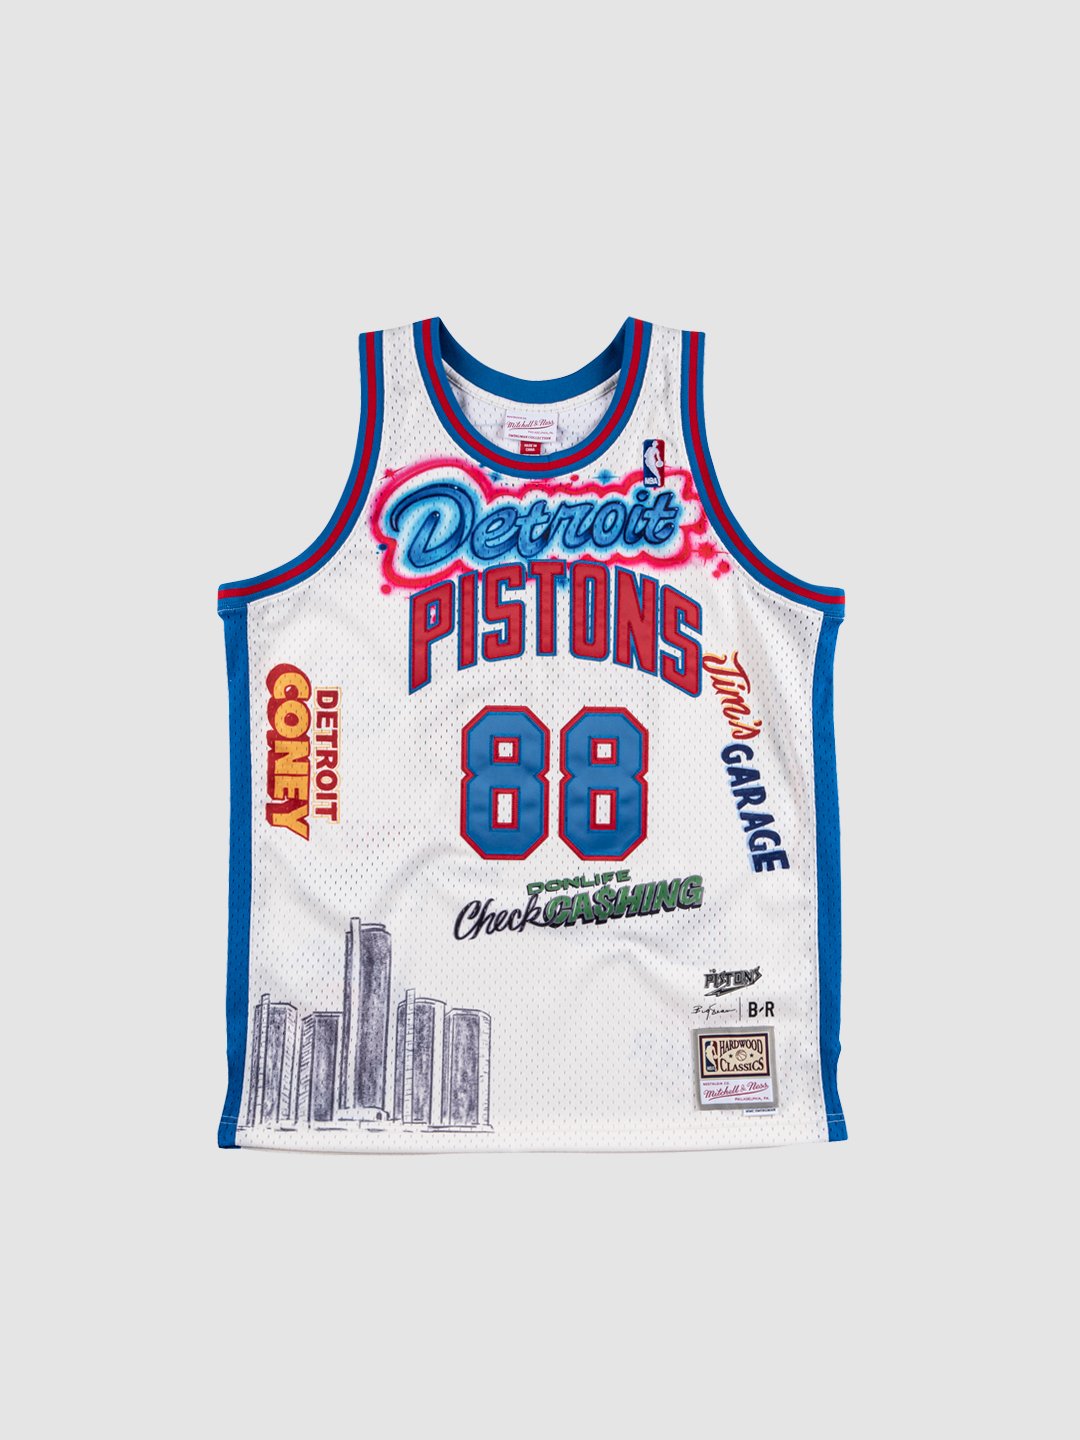 Big Sean Designed a New Pistons Jersey, Coming this October –  SportsLogos.Net News